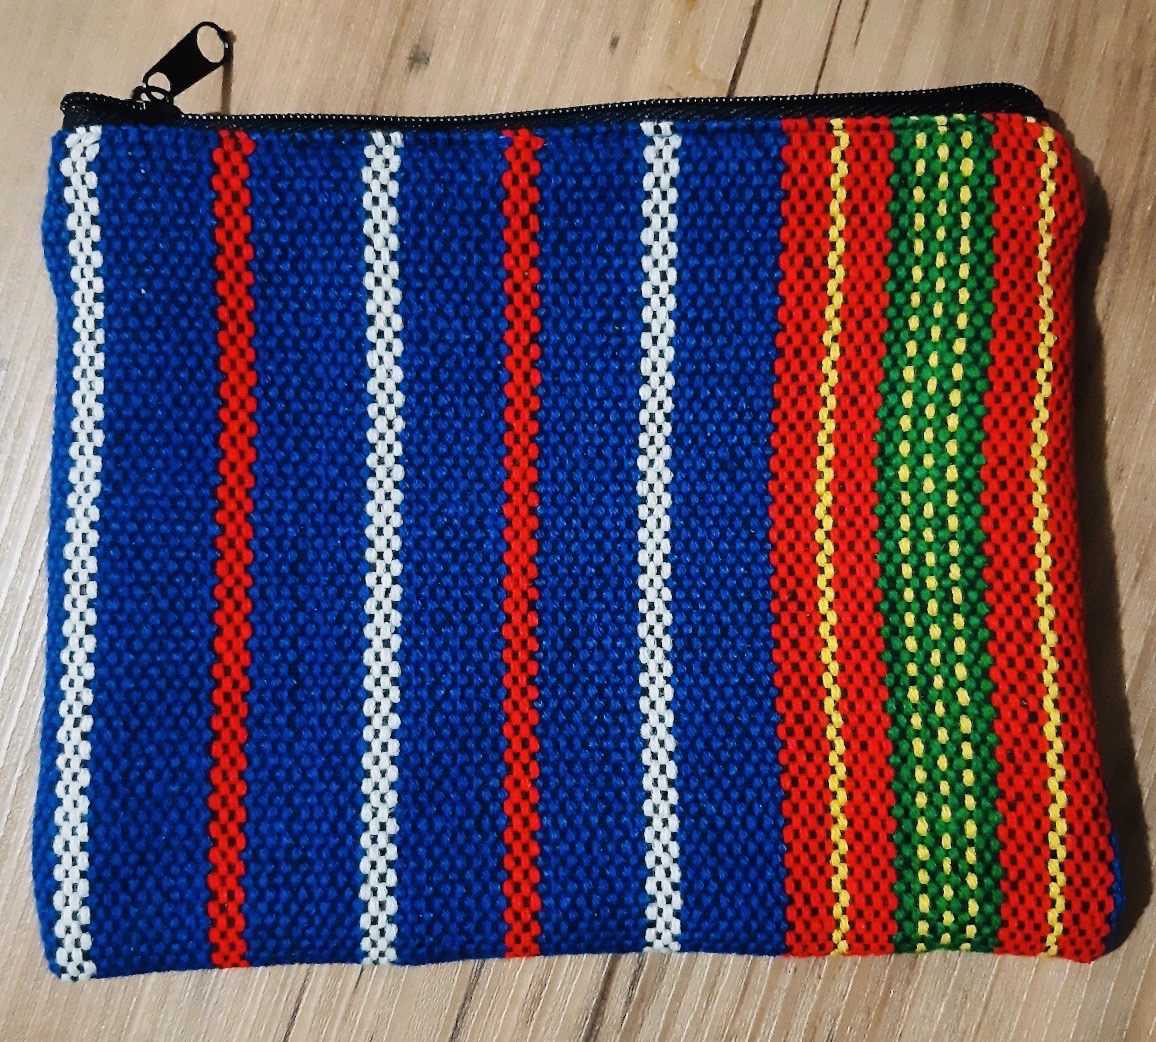 Baguio woven pouch included free with Bituin Elixirs set of 6 purchase before 1/8/2020